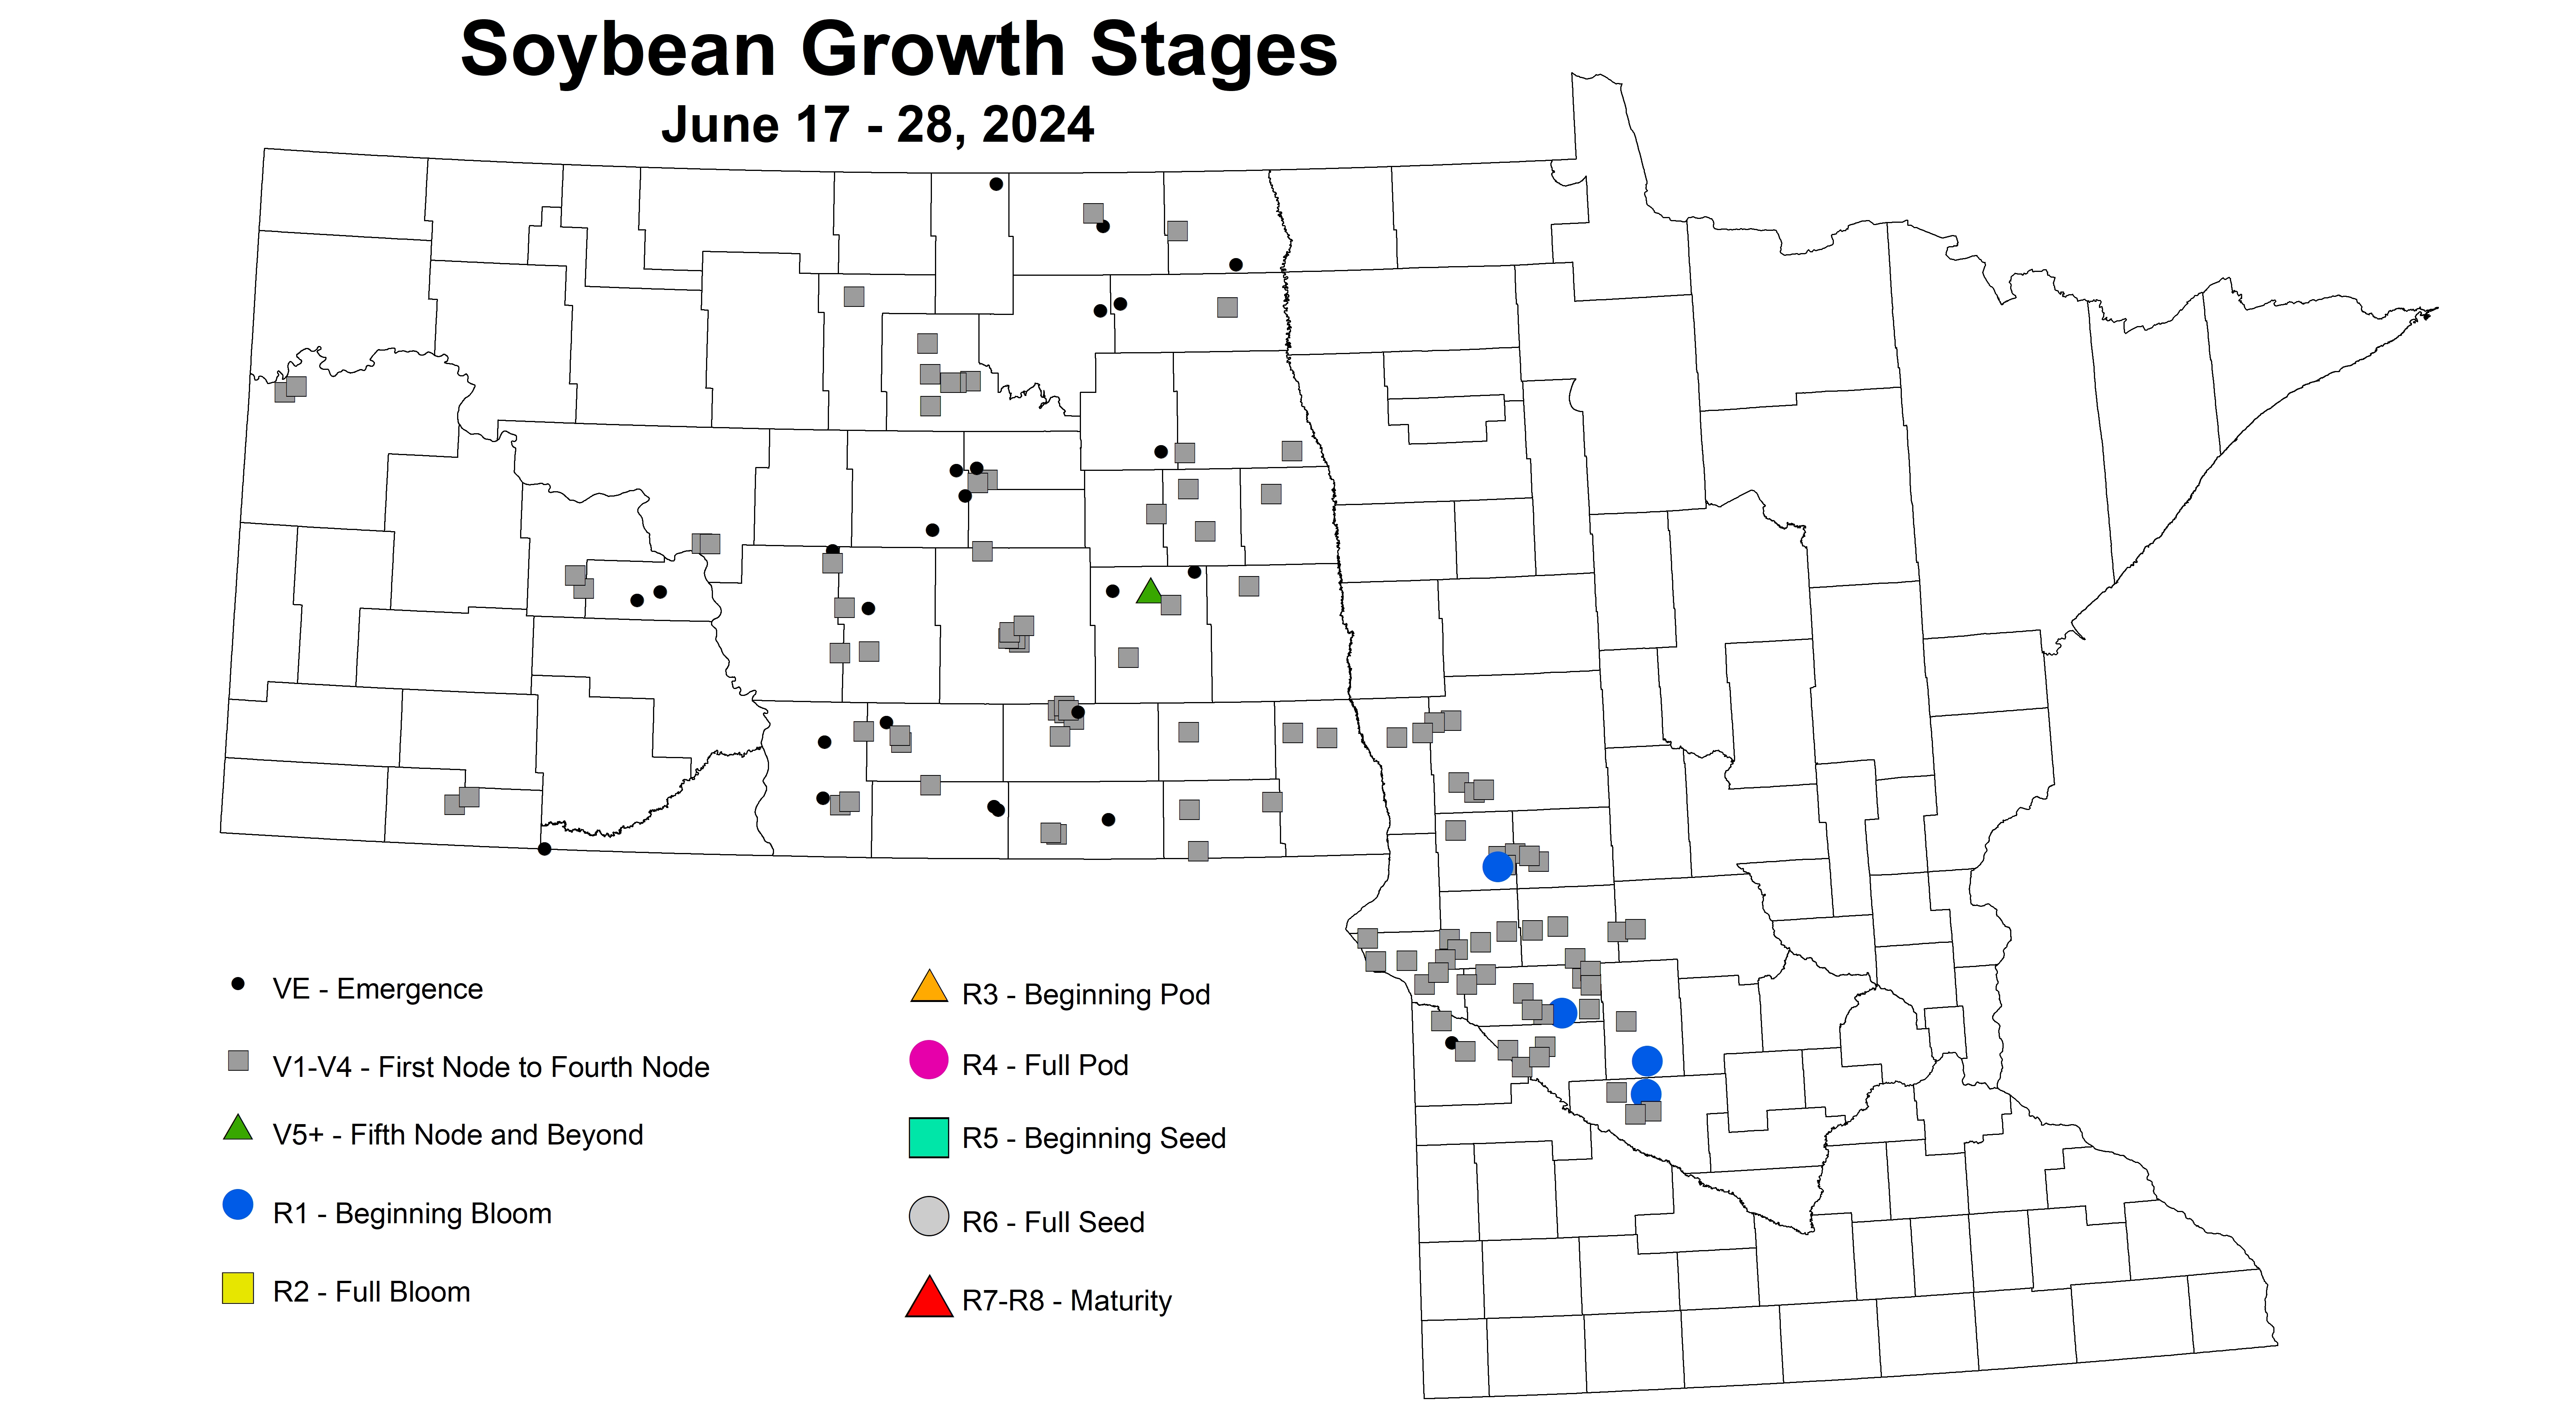 soybean growth stages June 17-28 2024